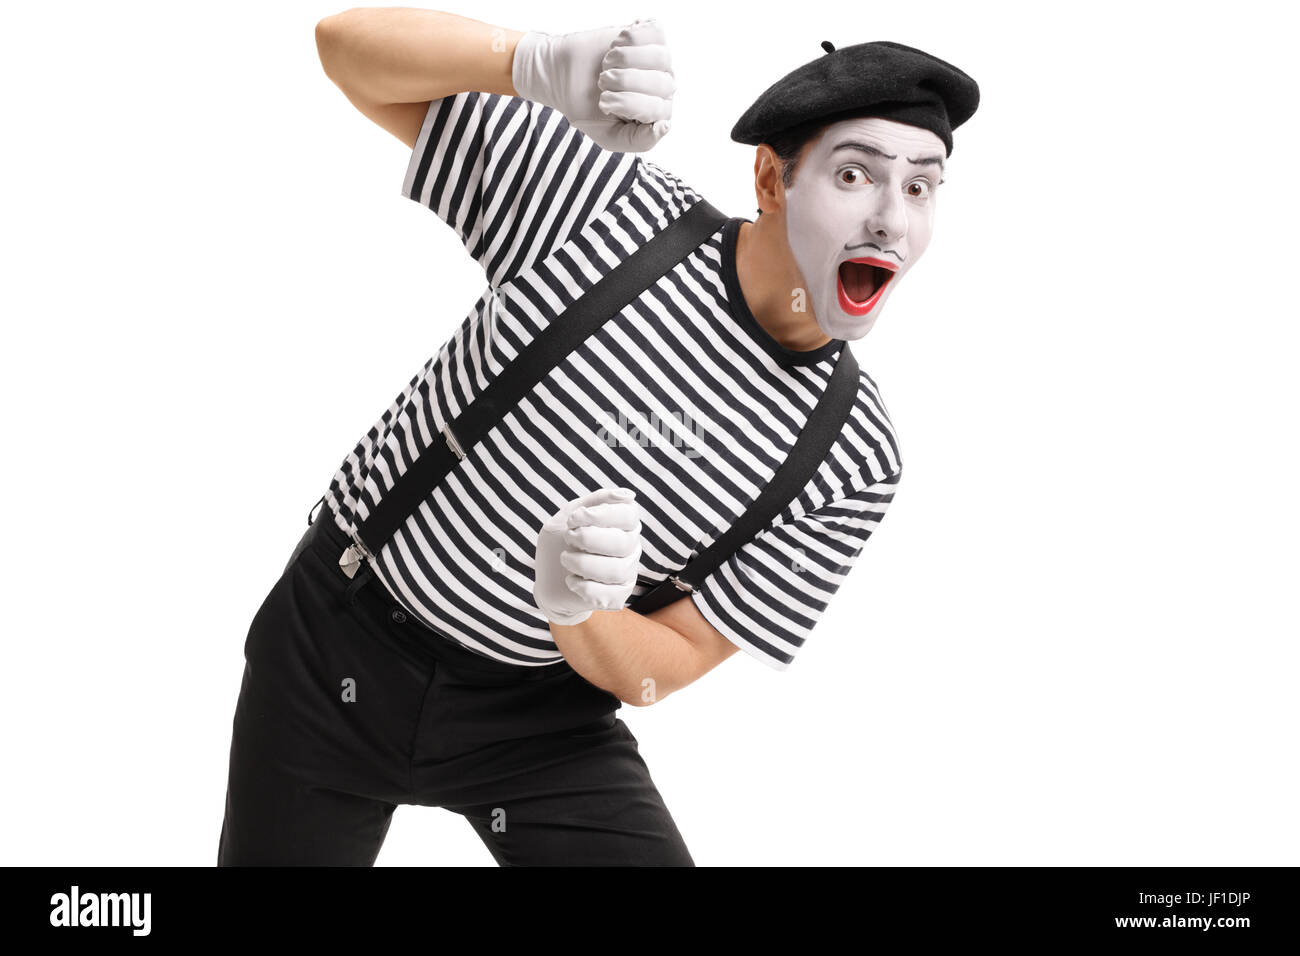 Mime behind an imaginary panel isolated on white background Stock Photo